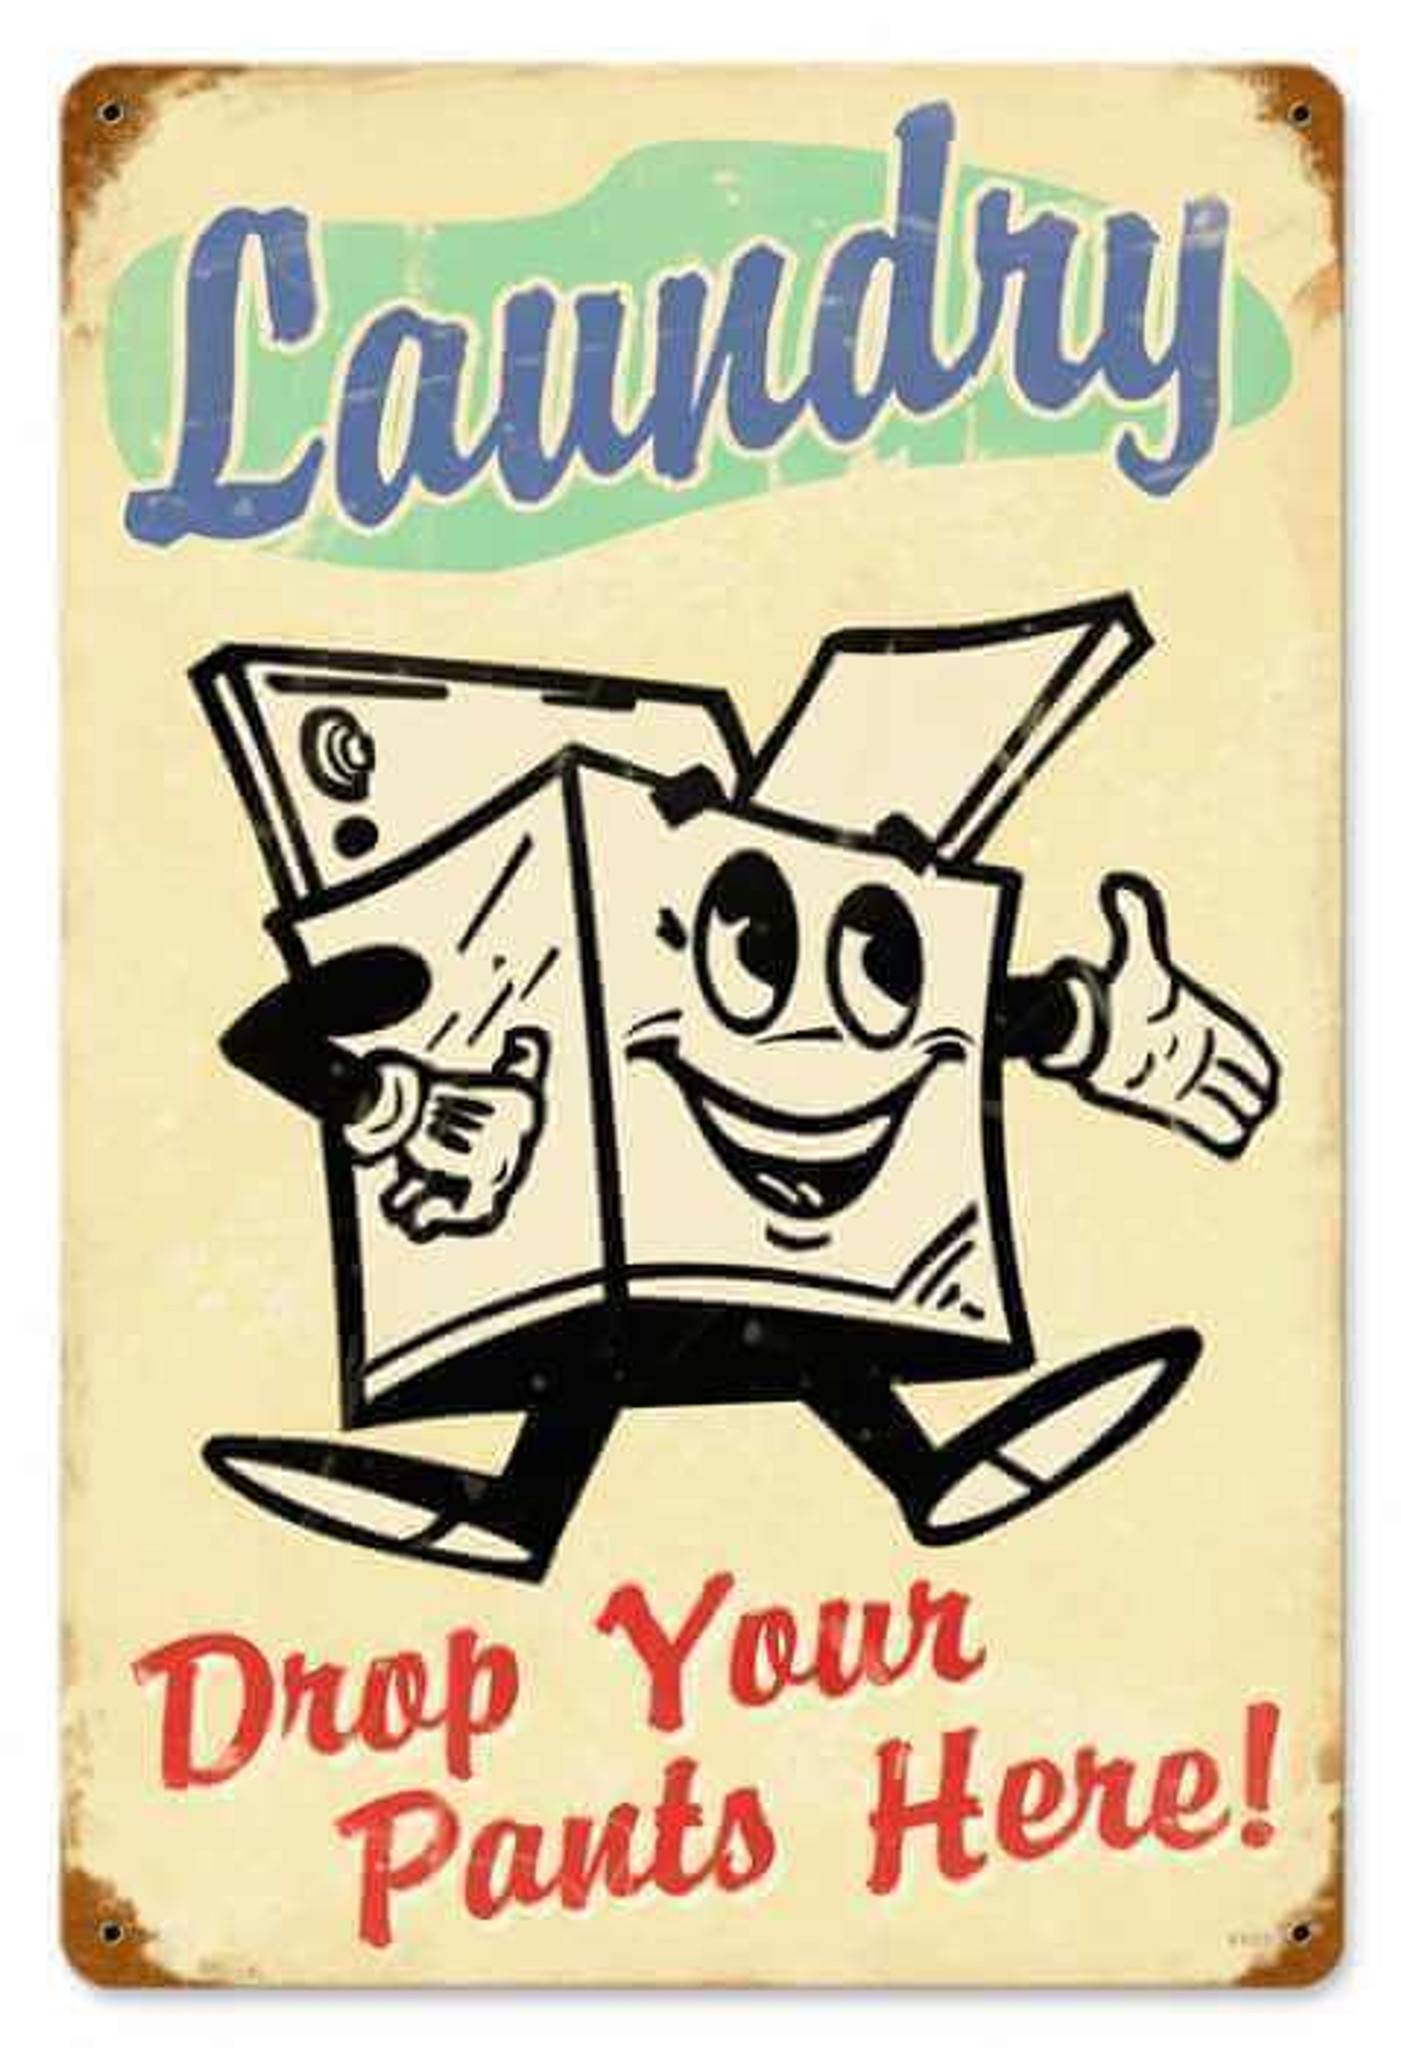 vintage-laundry-metal-sign-12-x-18-inches